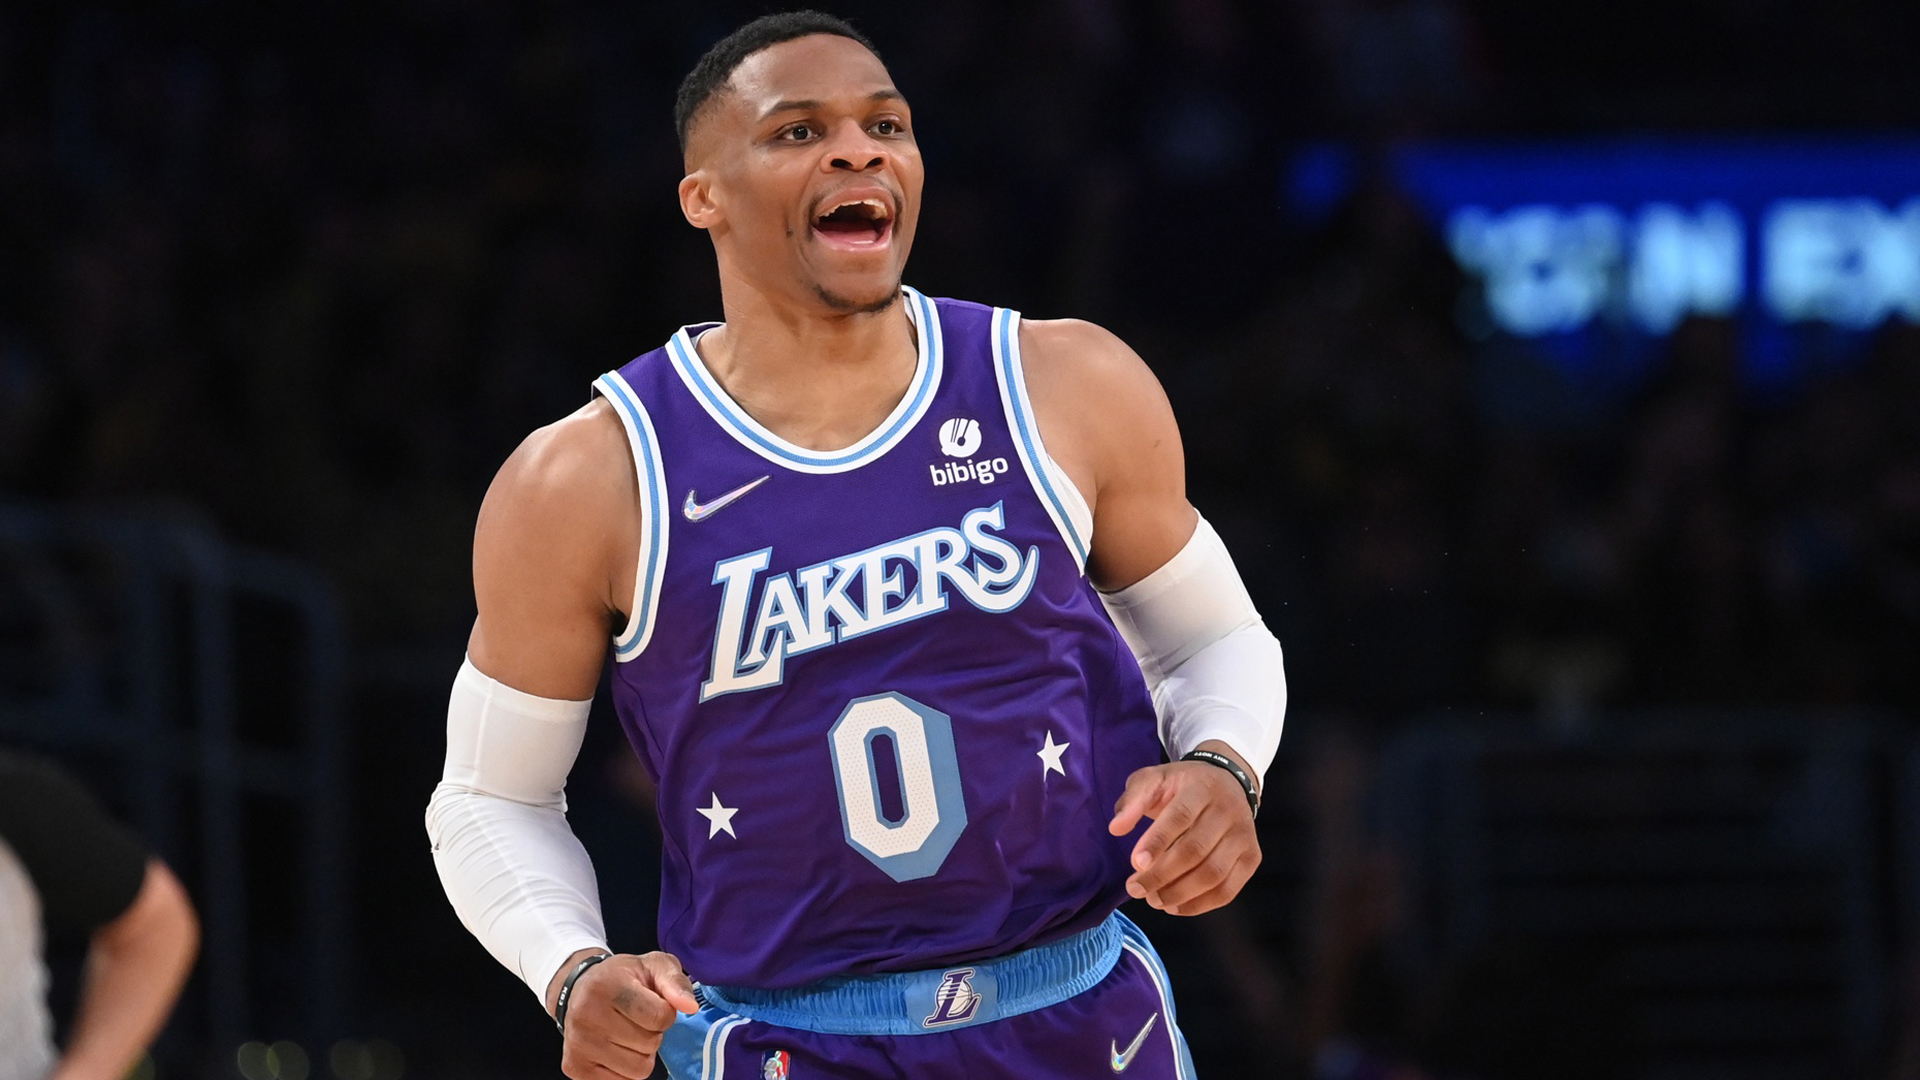 ESPN - Russell Westbrook in Los Angeles Lakers purple and gold